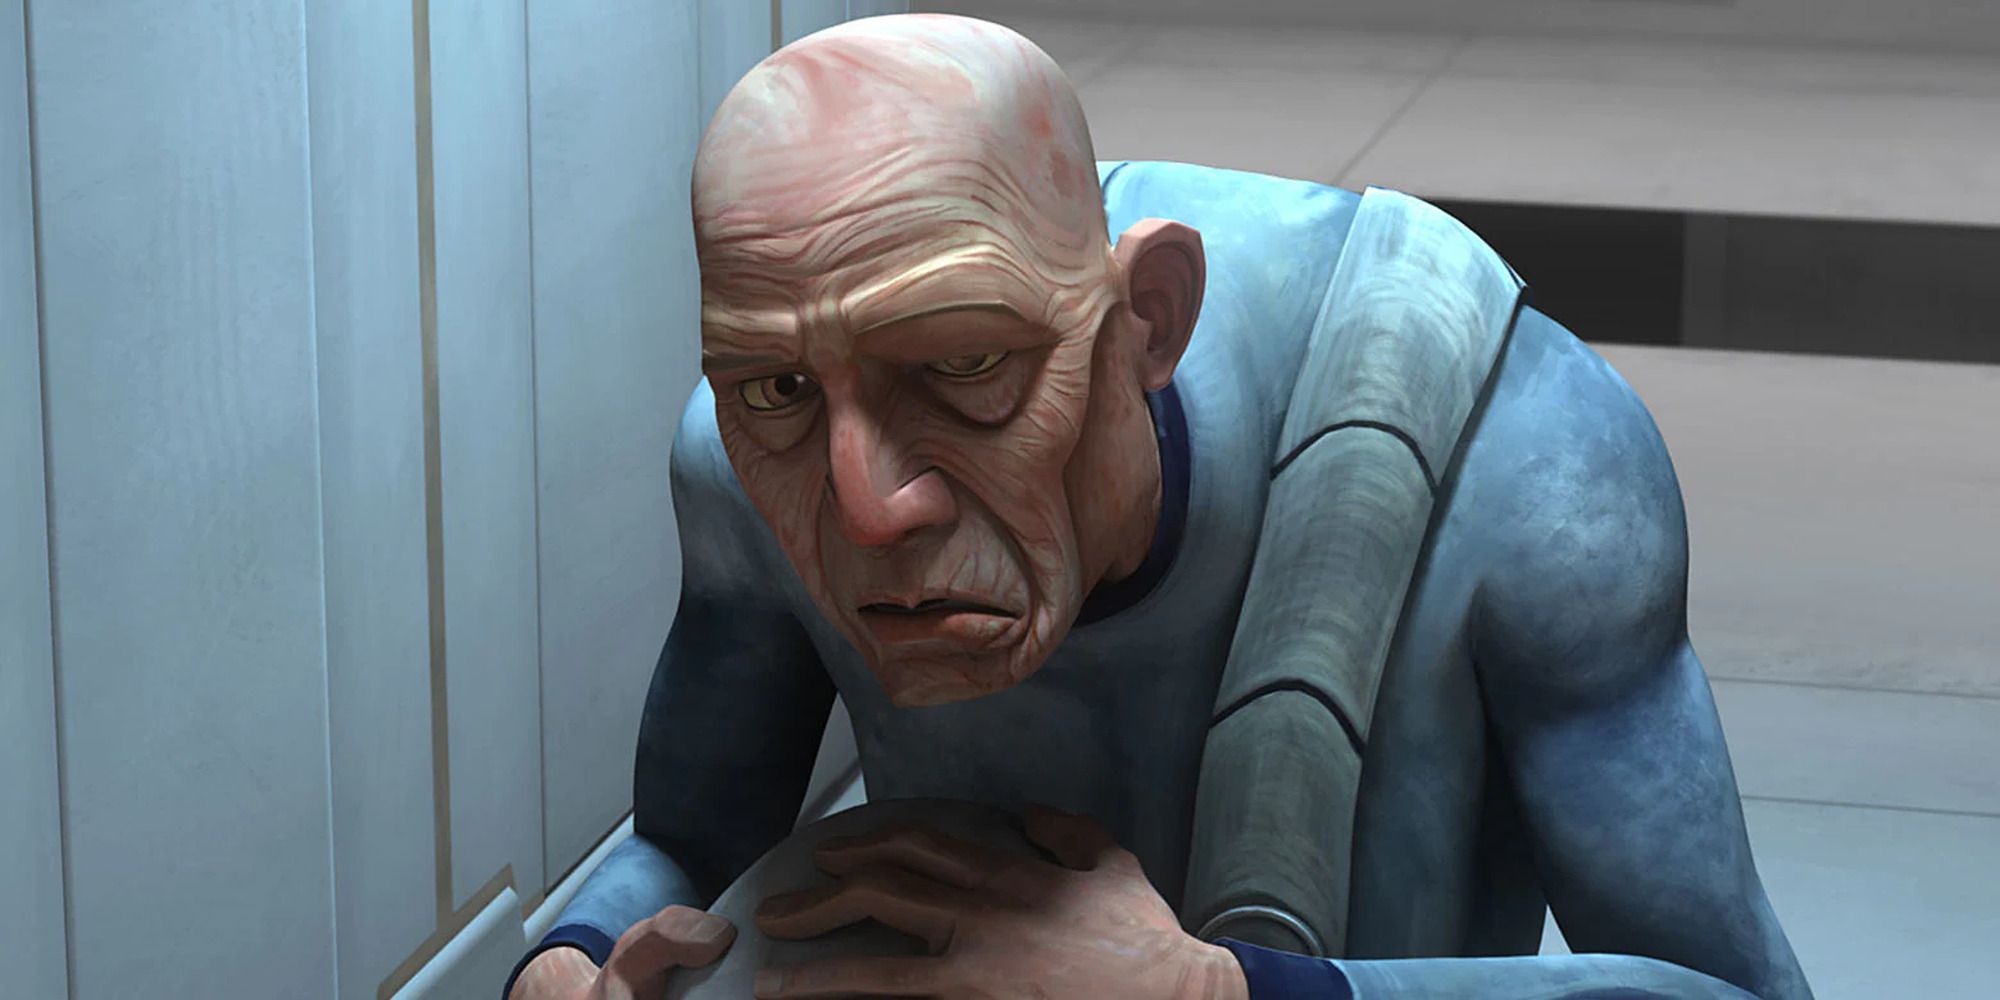 an old, malformed clone trooper looking up at the camera